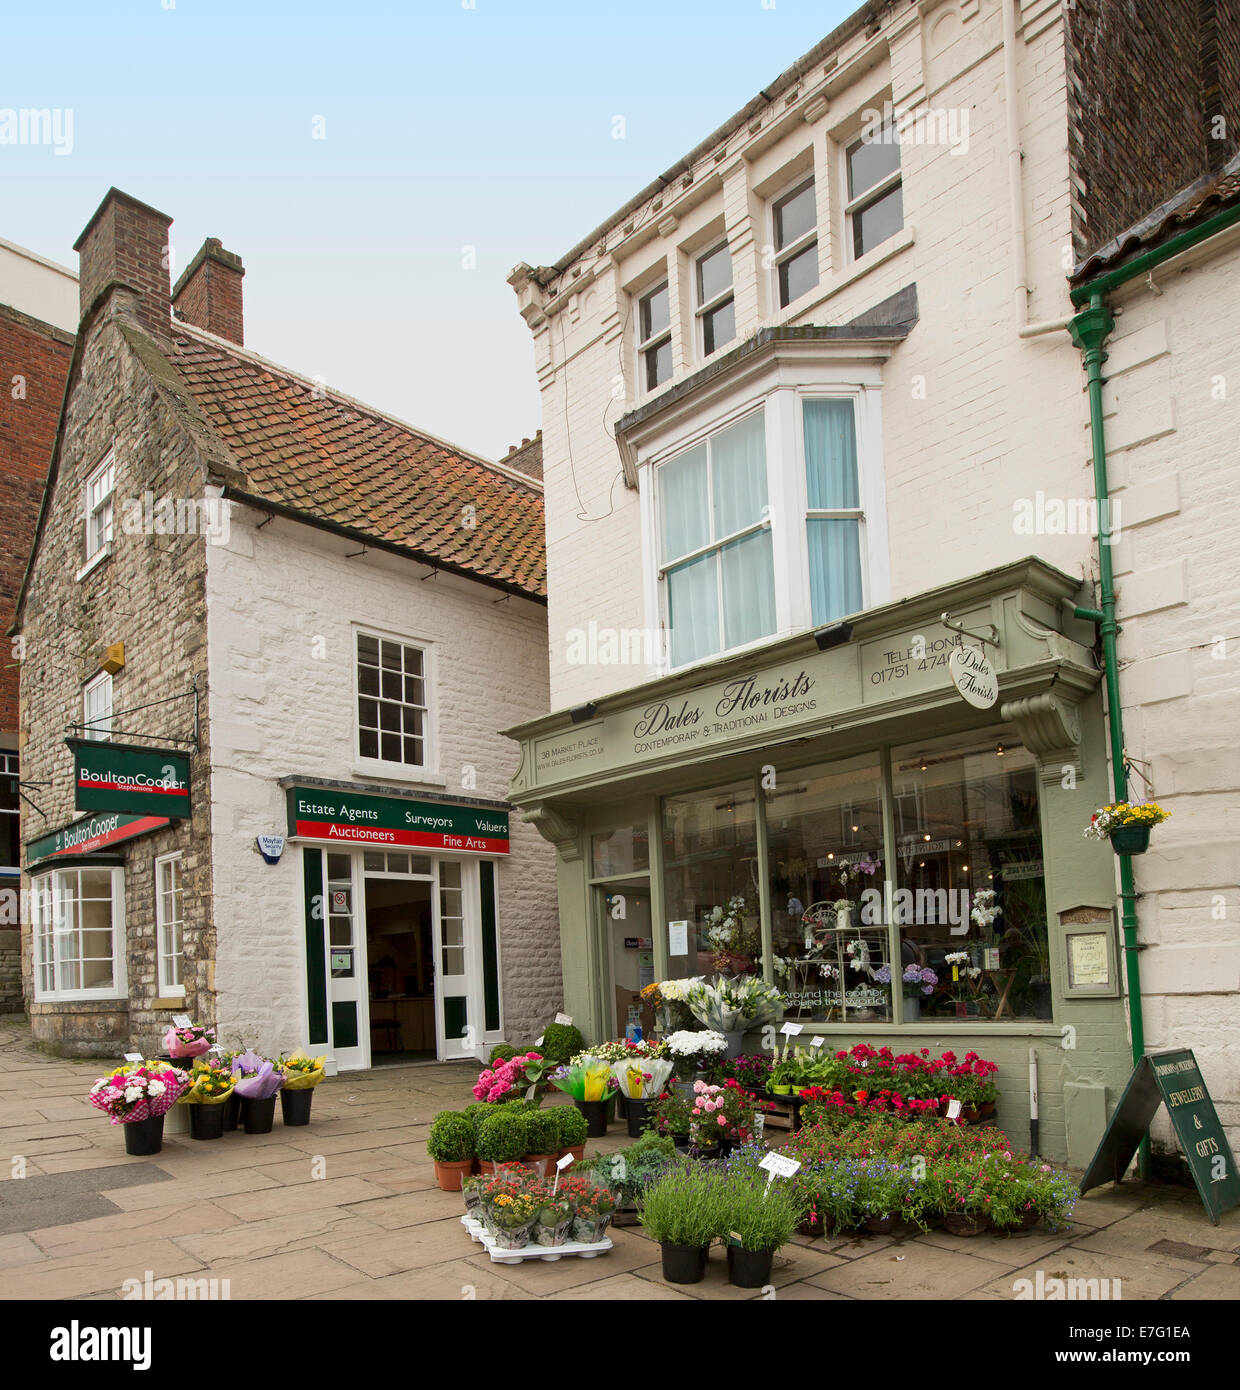 Florist's shop with cut flowers and pots of colourful flowering plants on pavement in English village of Pickering Stock Photo